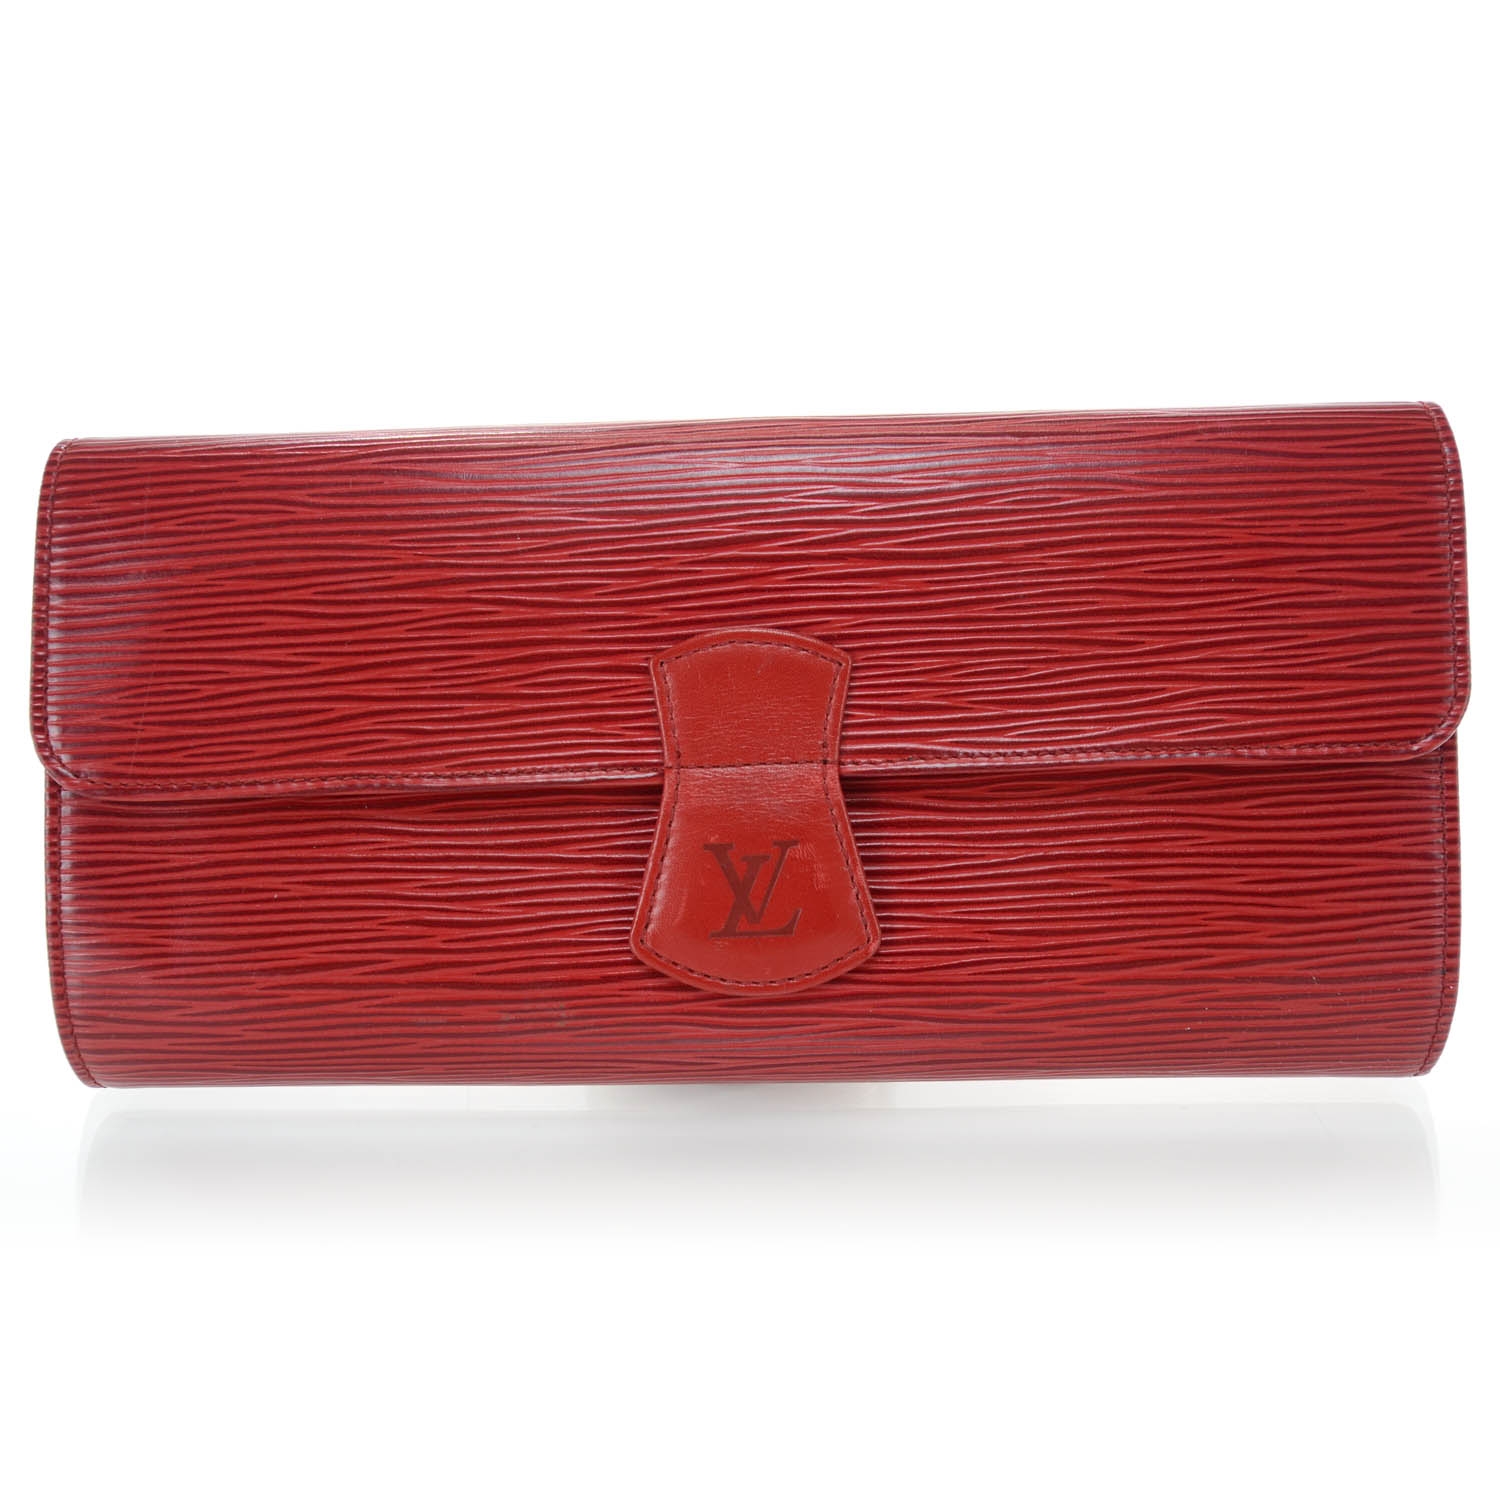 LOUIS VUITTON Epi Rouleau Bijoux Jewelry Roll Pouch Red 38128